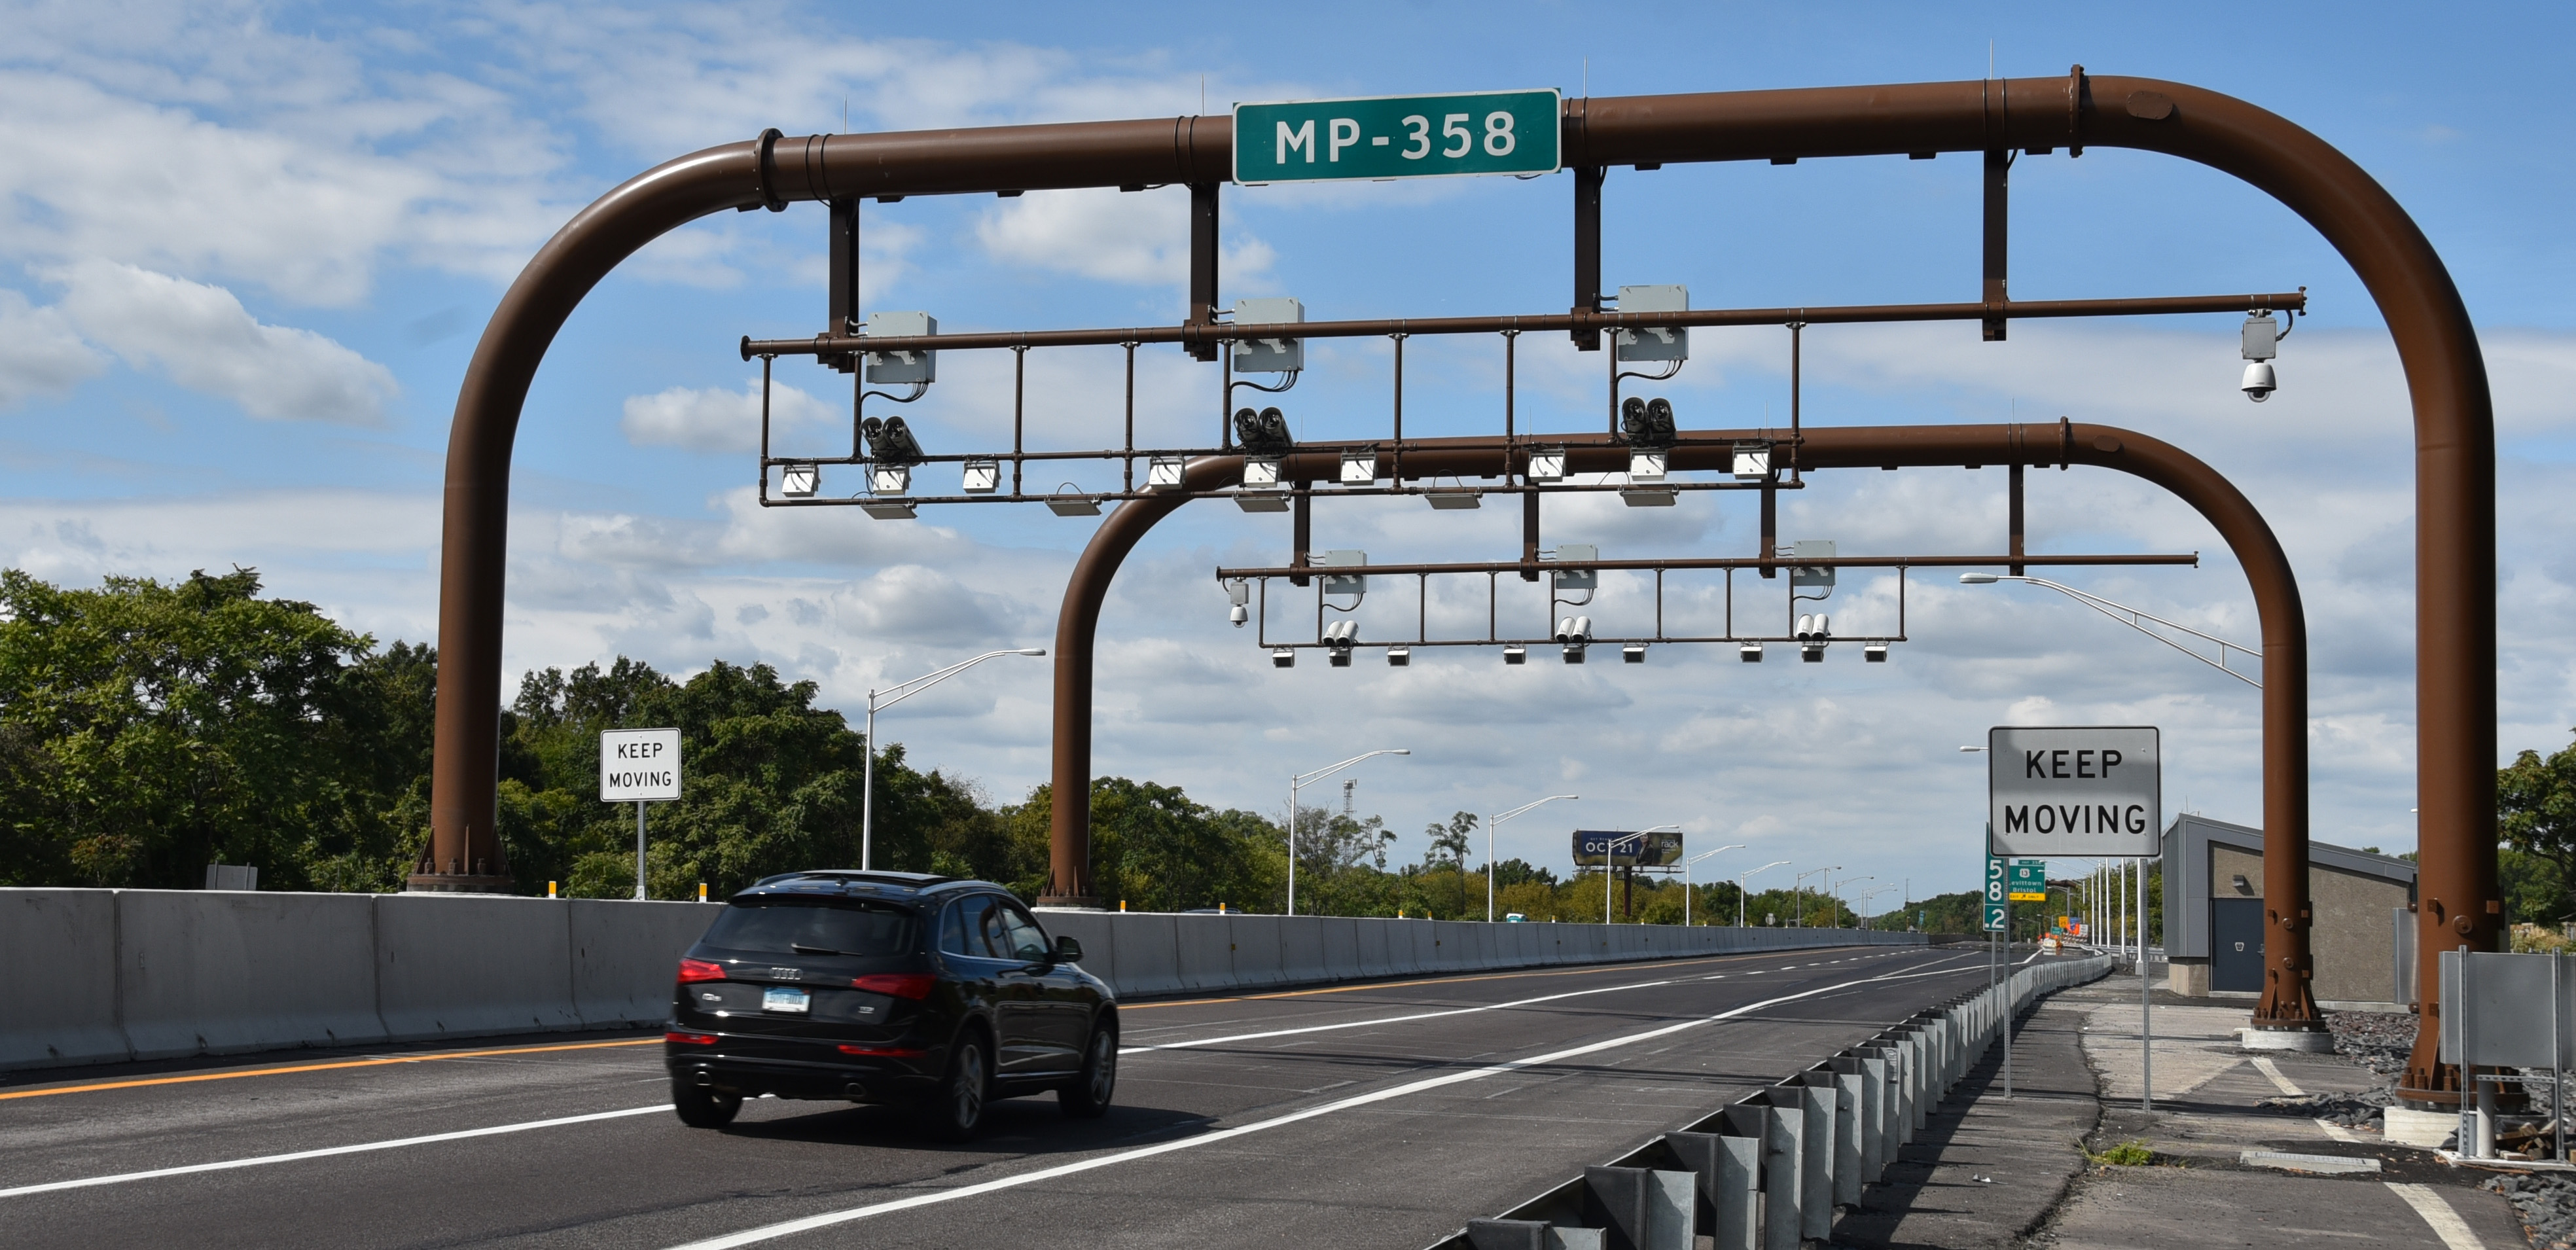 Two curved metal beams with mounted cameras over a two-lane highway.